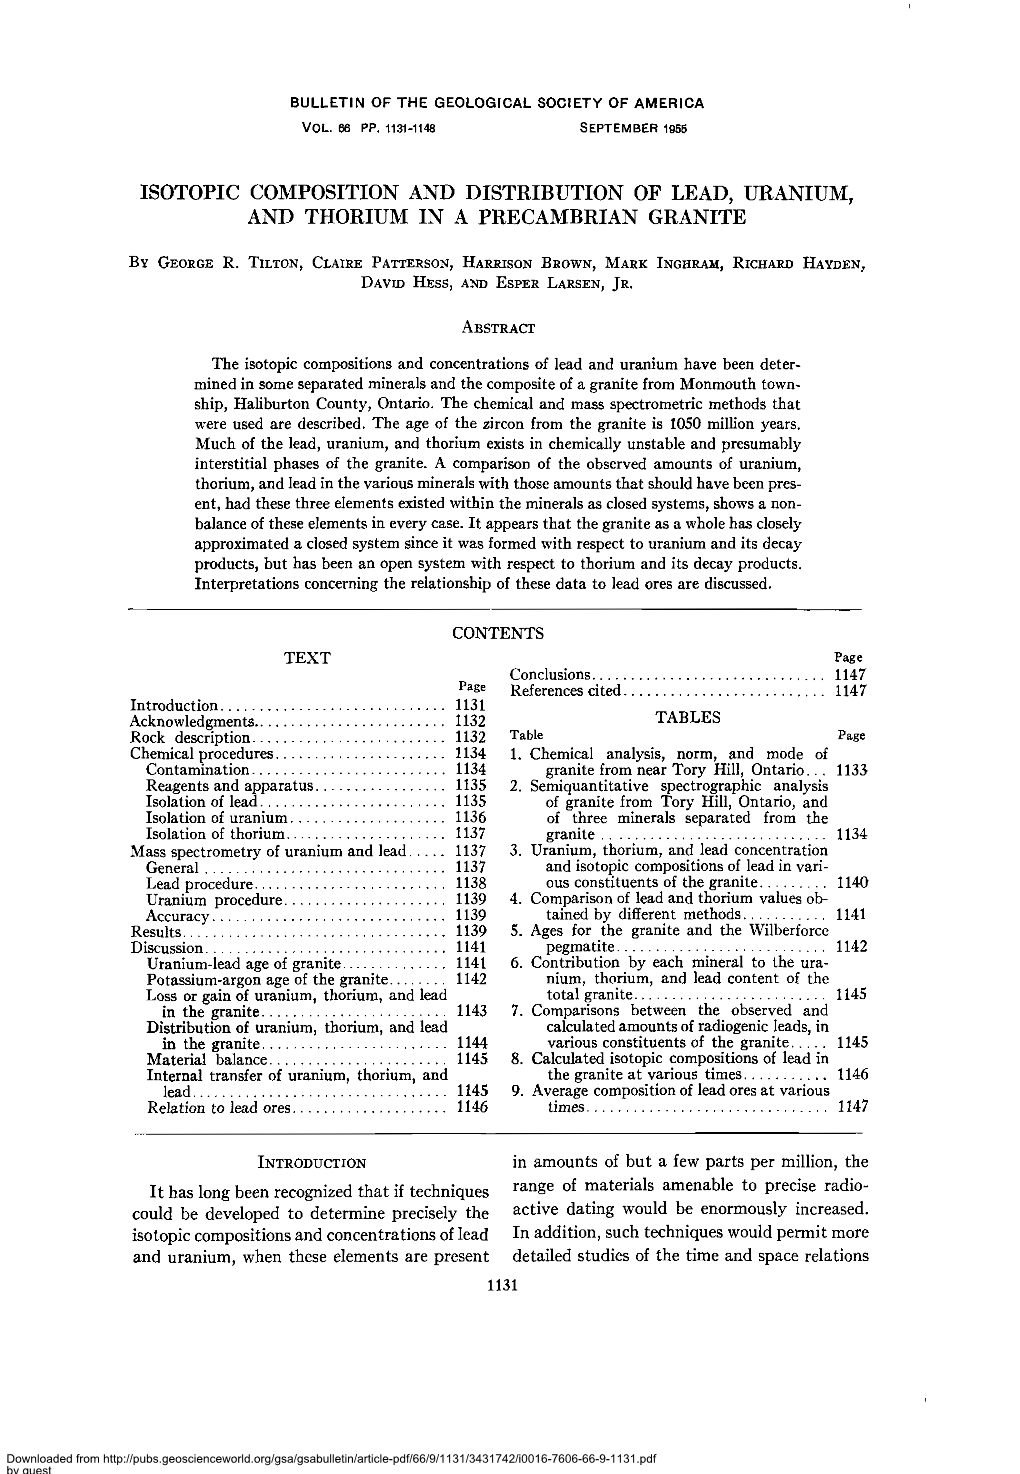 Bulletin of the Geological Society of America Isotopic